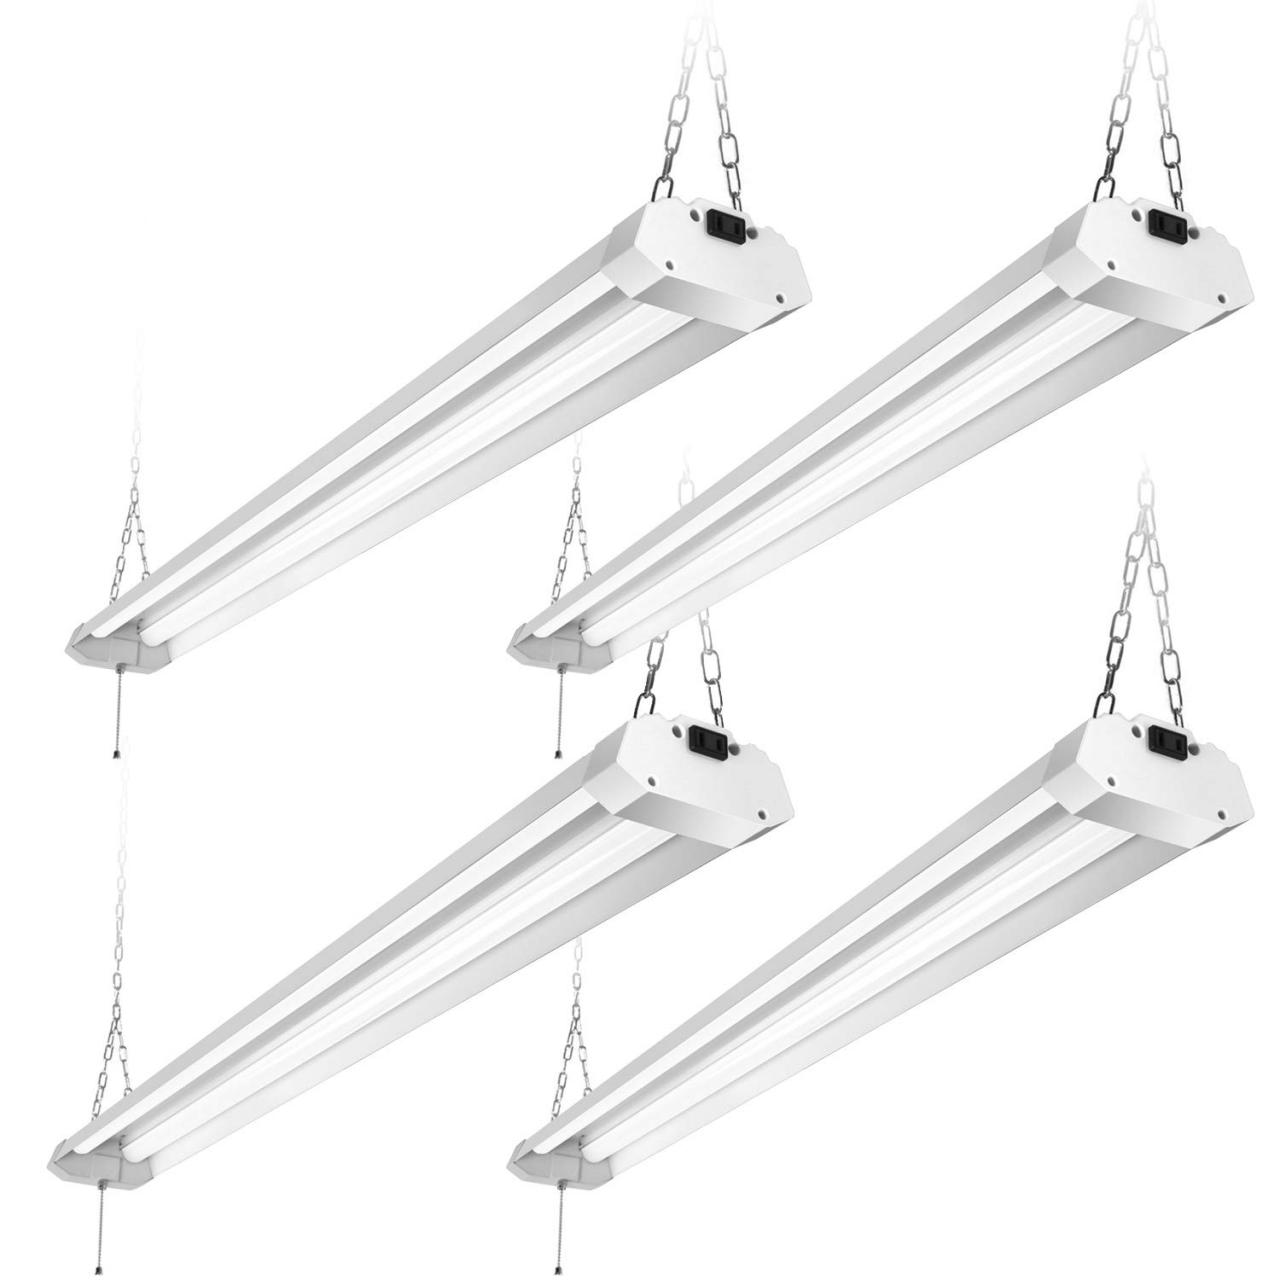 Linkable LED Utility Shop Light 4ft 4800 Lumens Super Bright 40W 5000K  Daylight Ideal for Garage ETL/DLC Certified Durable LED Fixture with Pull  Chain Mounting and Daisy Chain Hardware Included 4 Pack